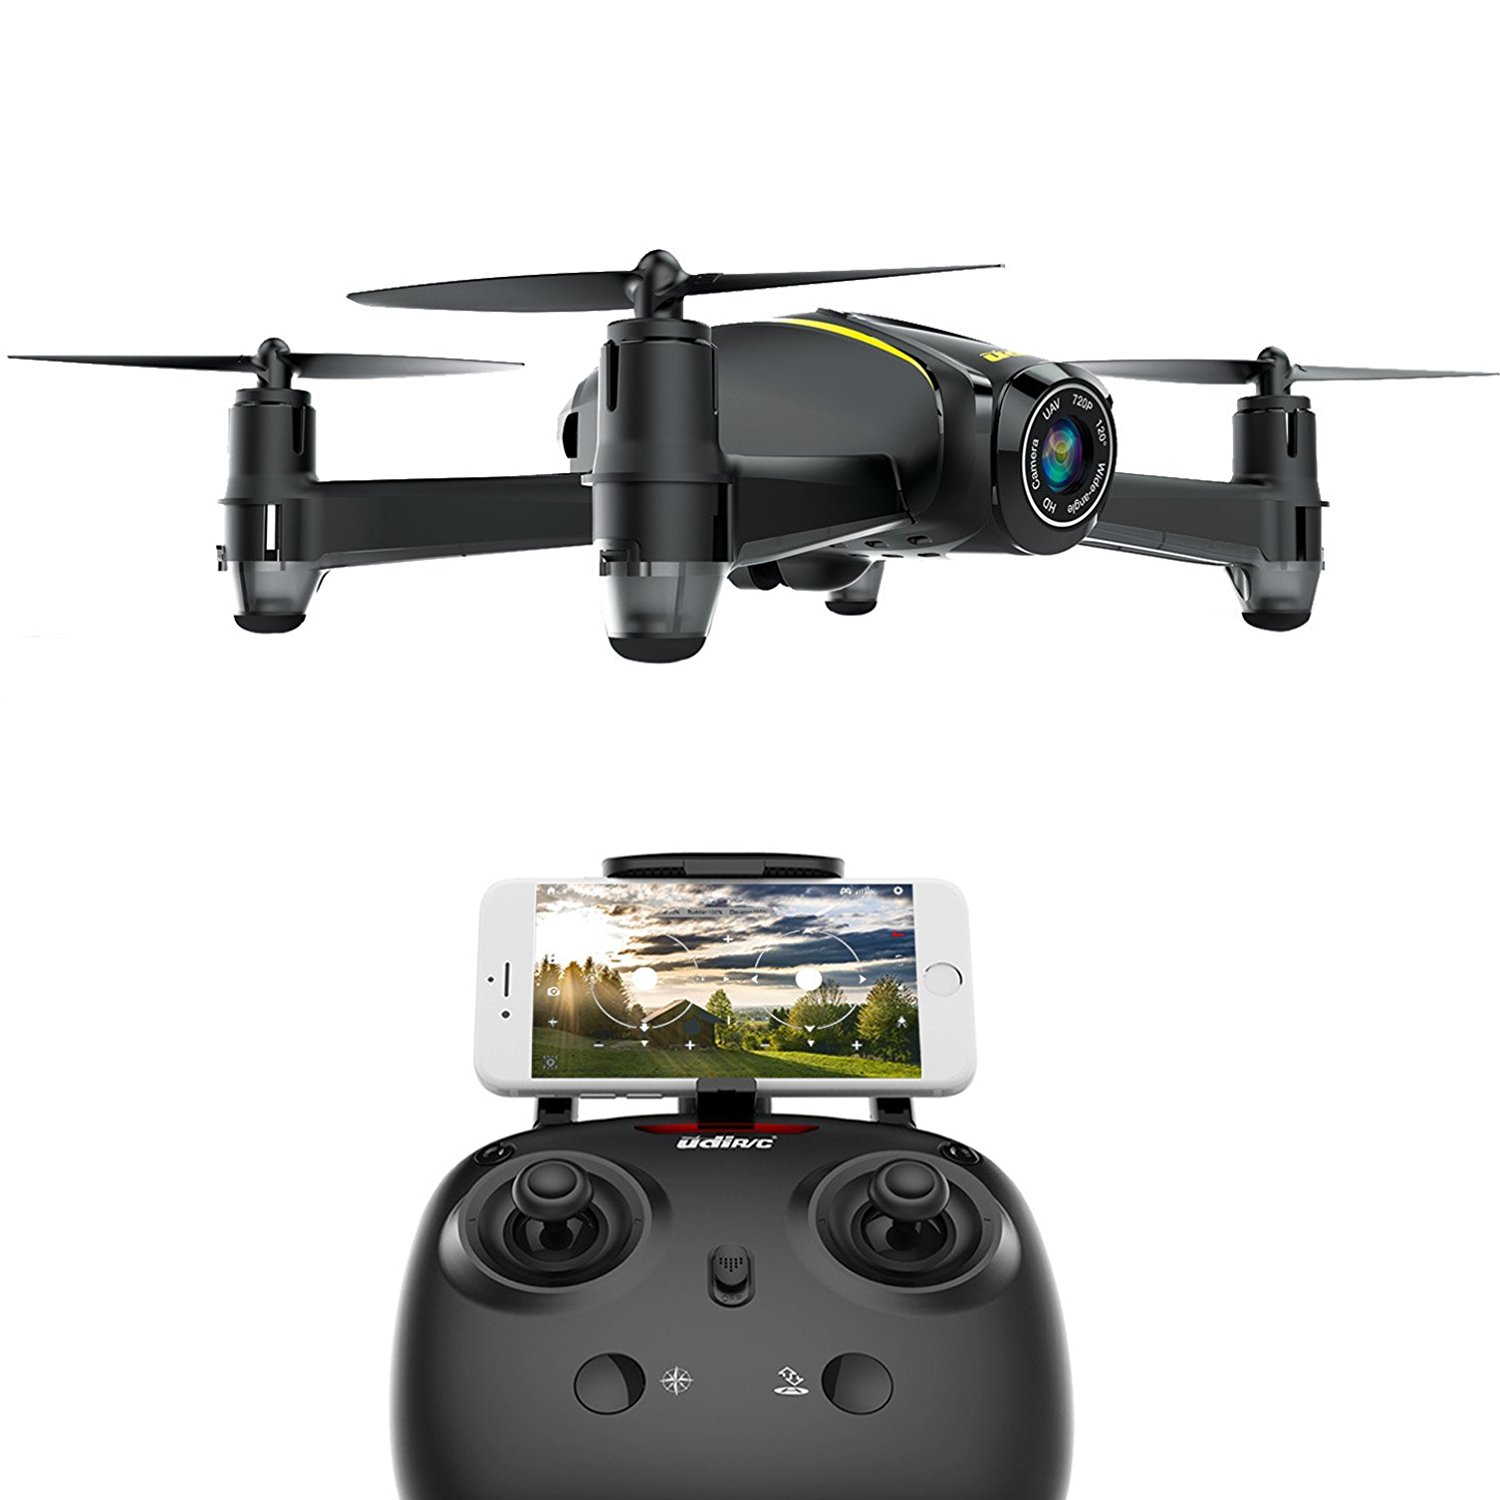 Navigator Kids Drone with HD Camera Only $59.99 Shipped!